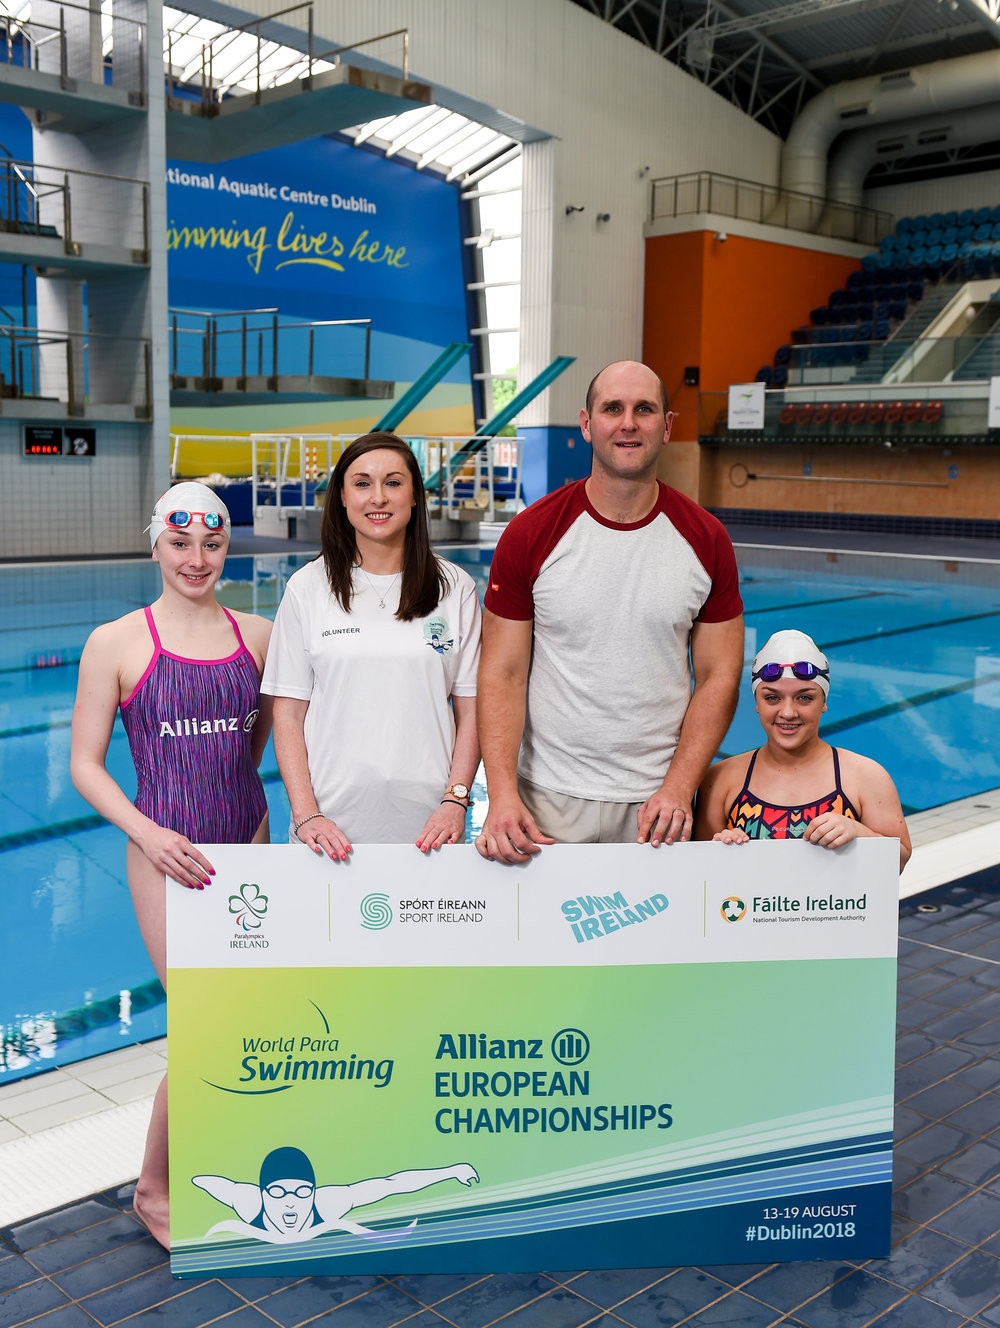 Tickets released for Dublin 2018 World Para Swimming European Championships